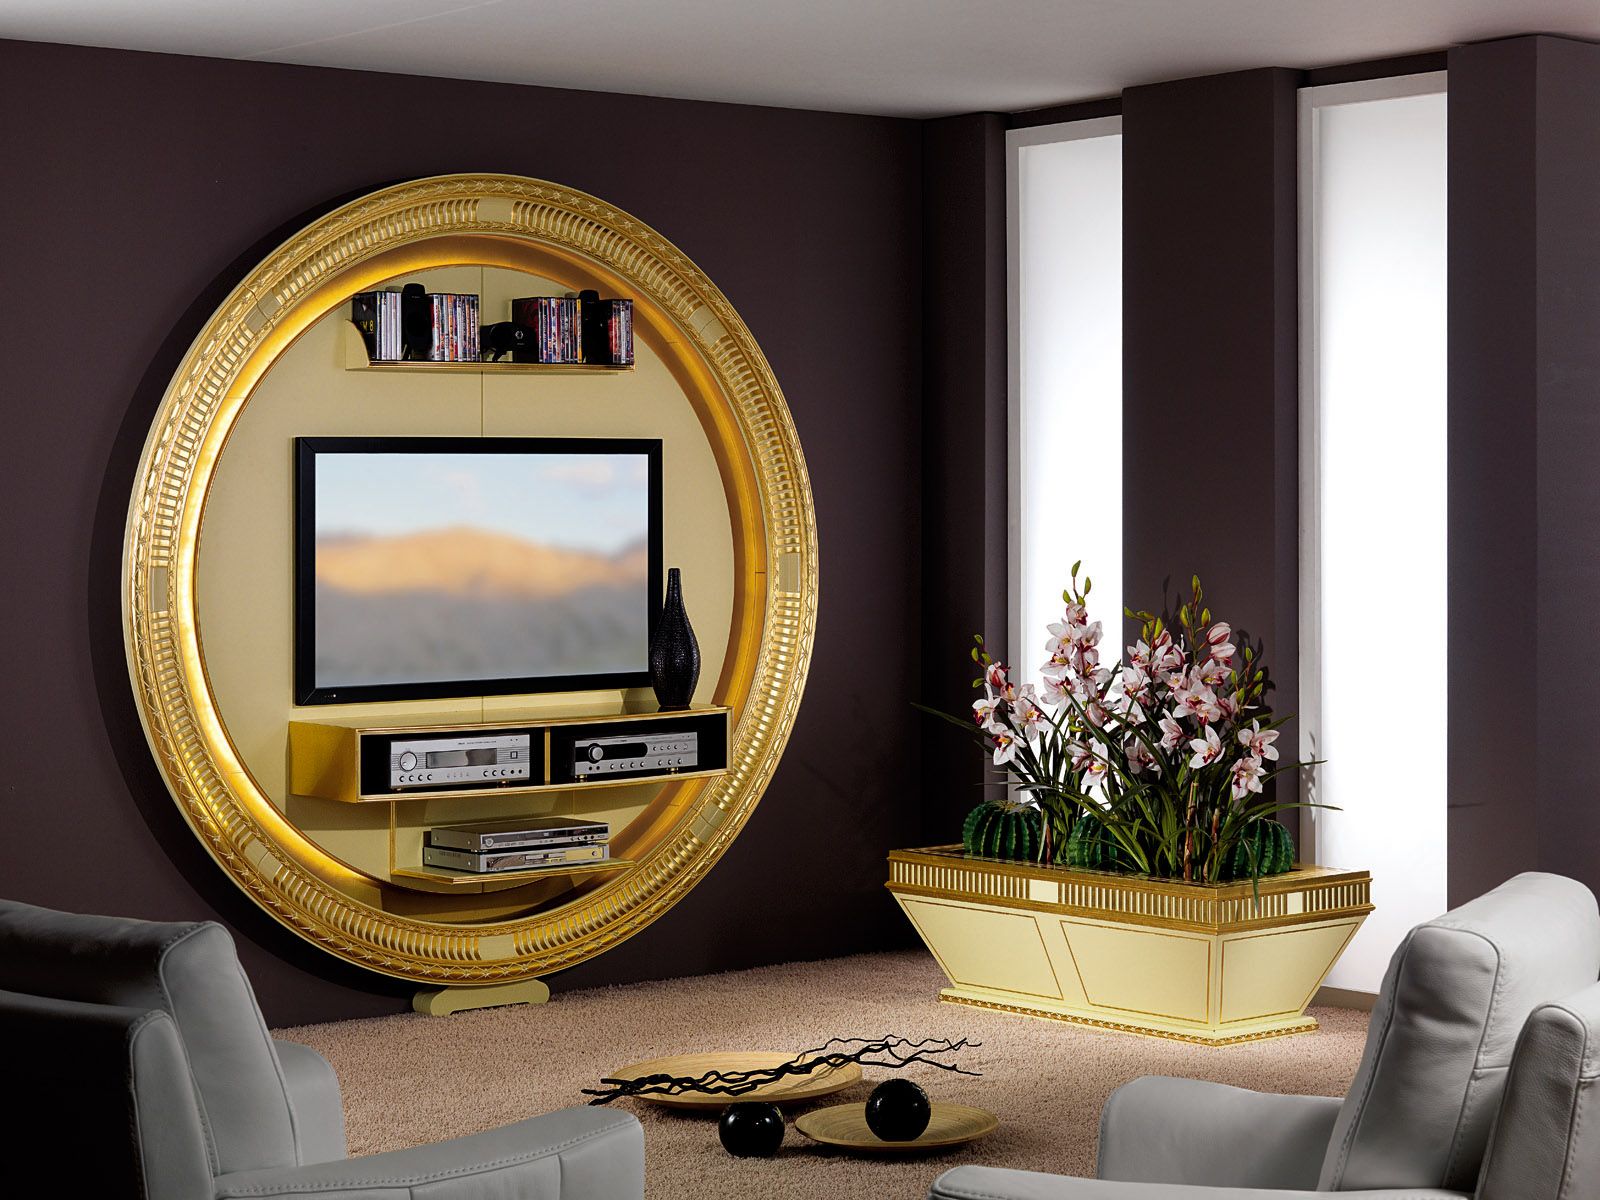 Fashionable Round Tv Wall Unit – Vismara In Circular Tv Stands (View 2 of 10)